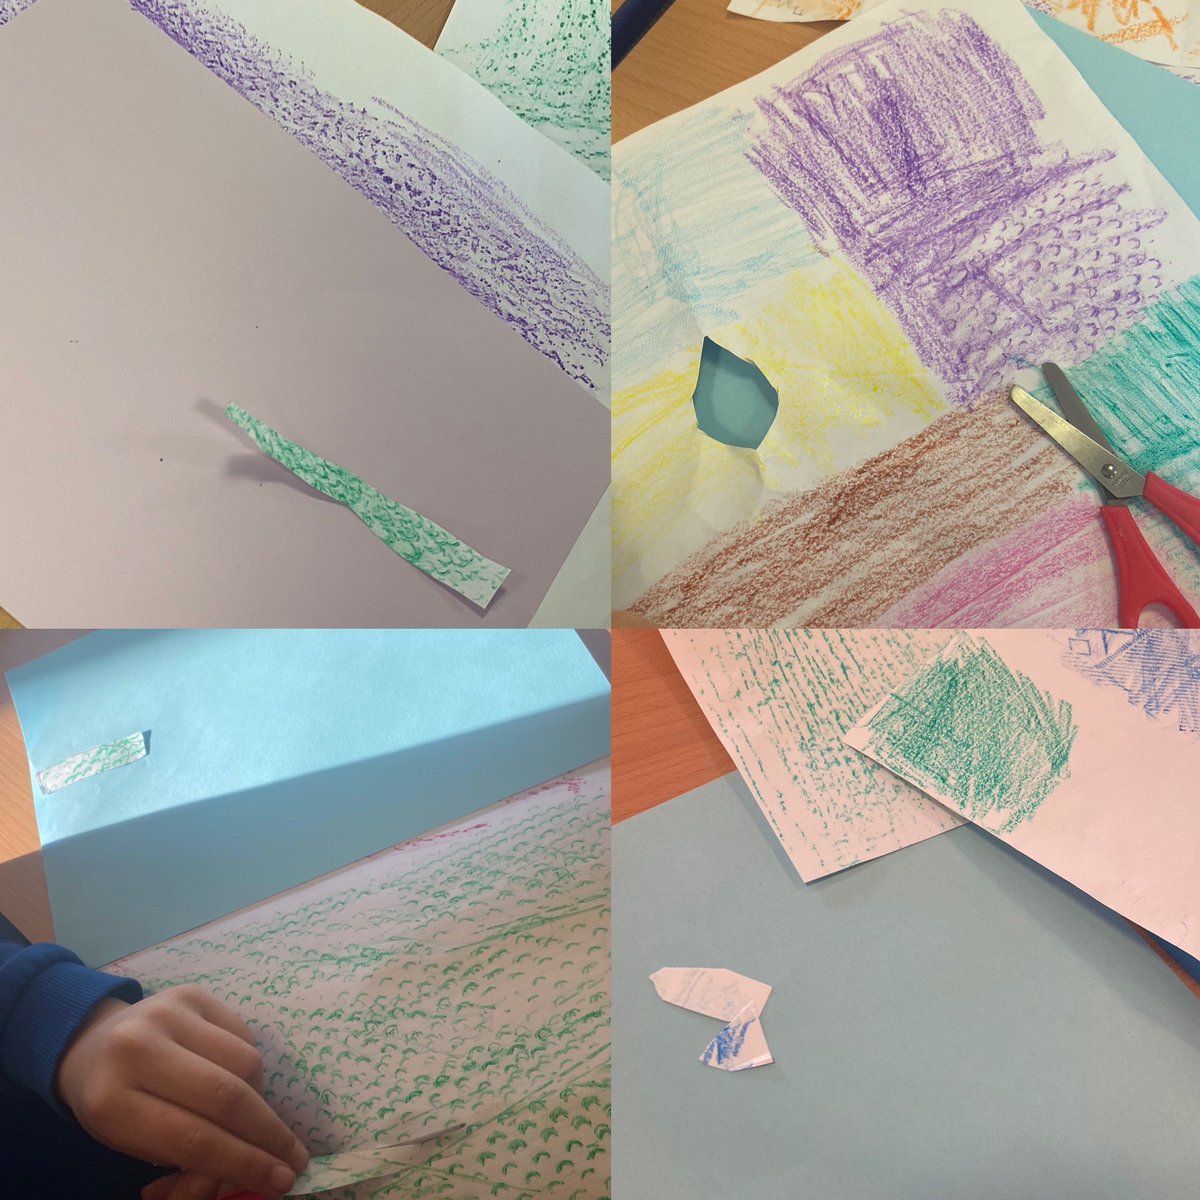 Textured artwork is being created in Hawthorns today. We are learning about ‘frottage’ and are making some beautiful flower pictures. Finished pictures will follow shortly!